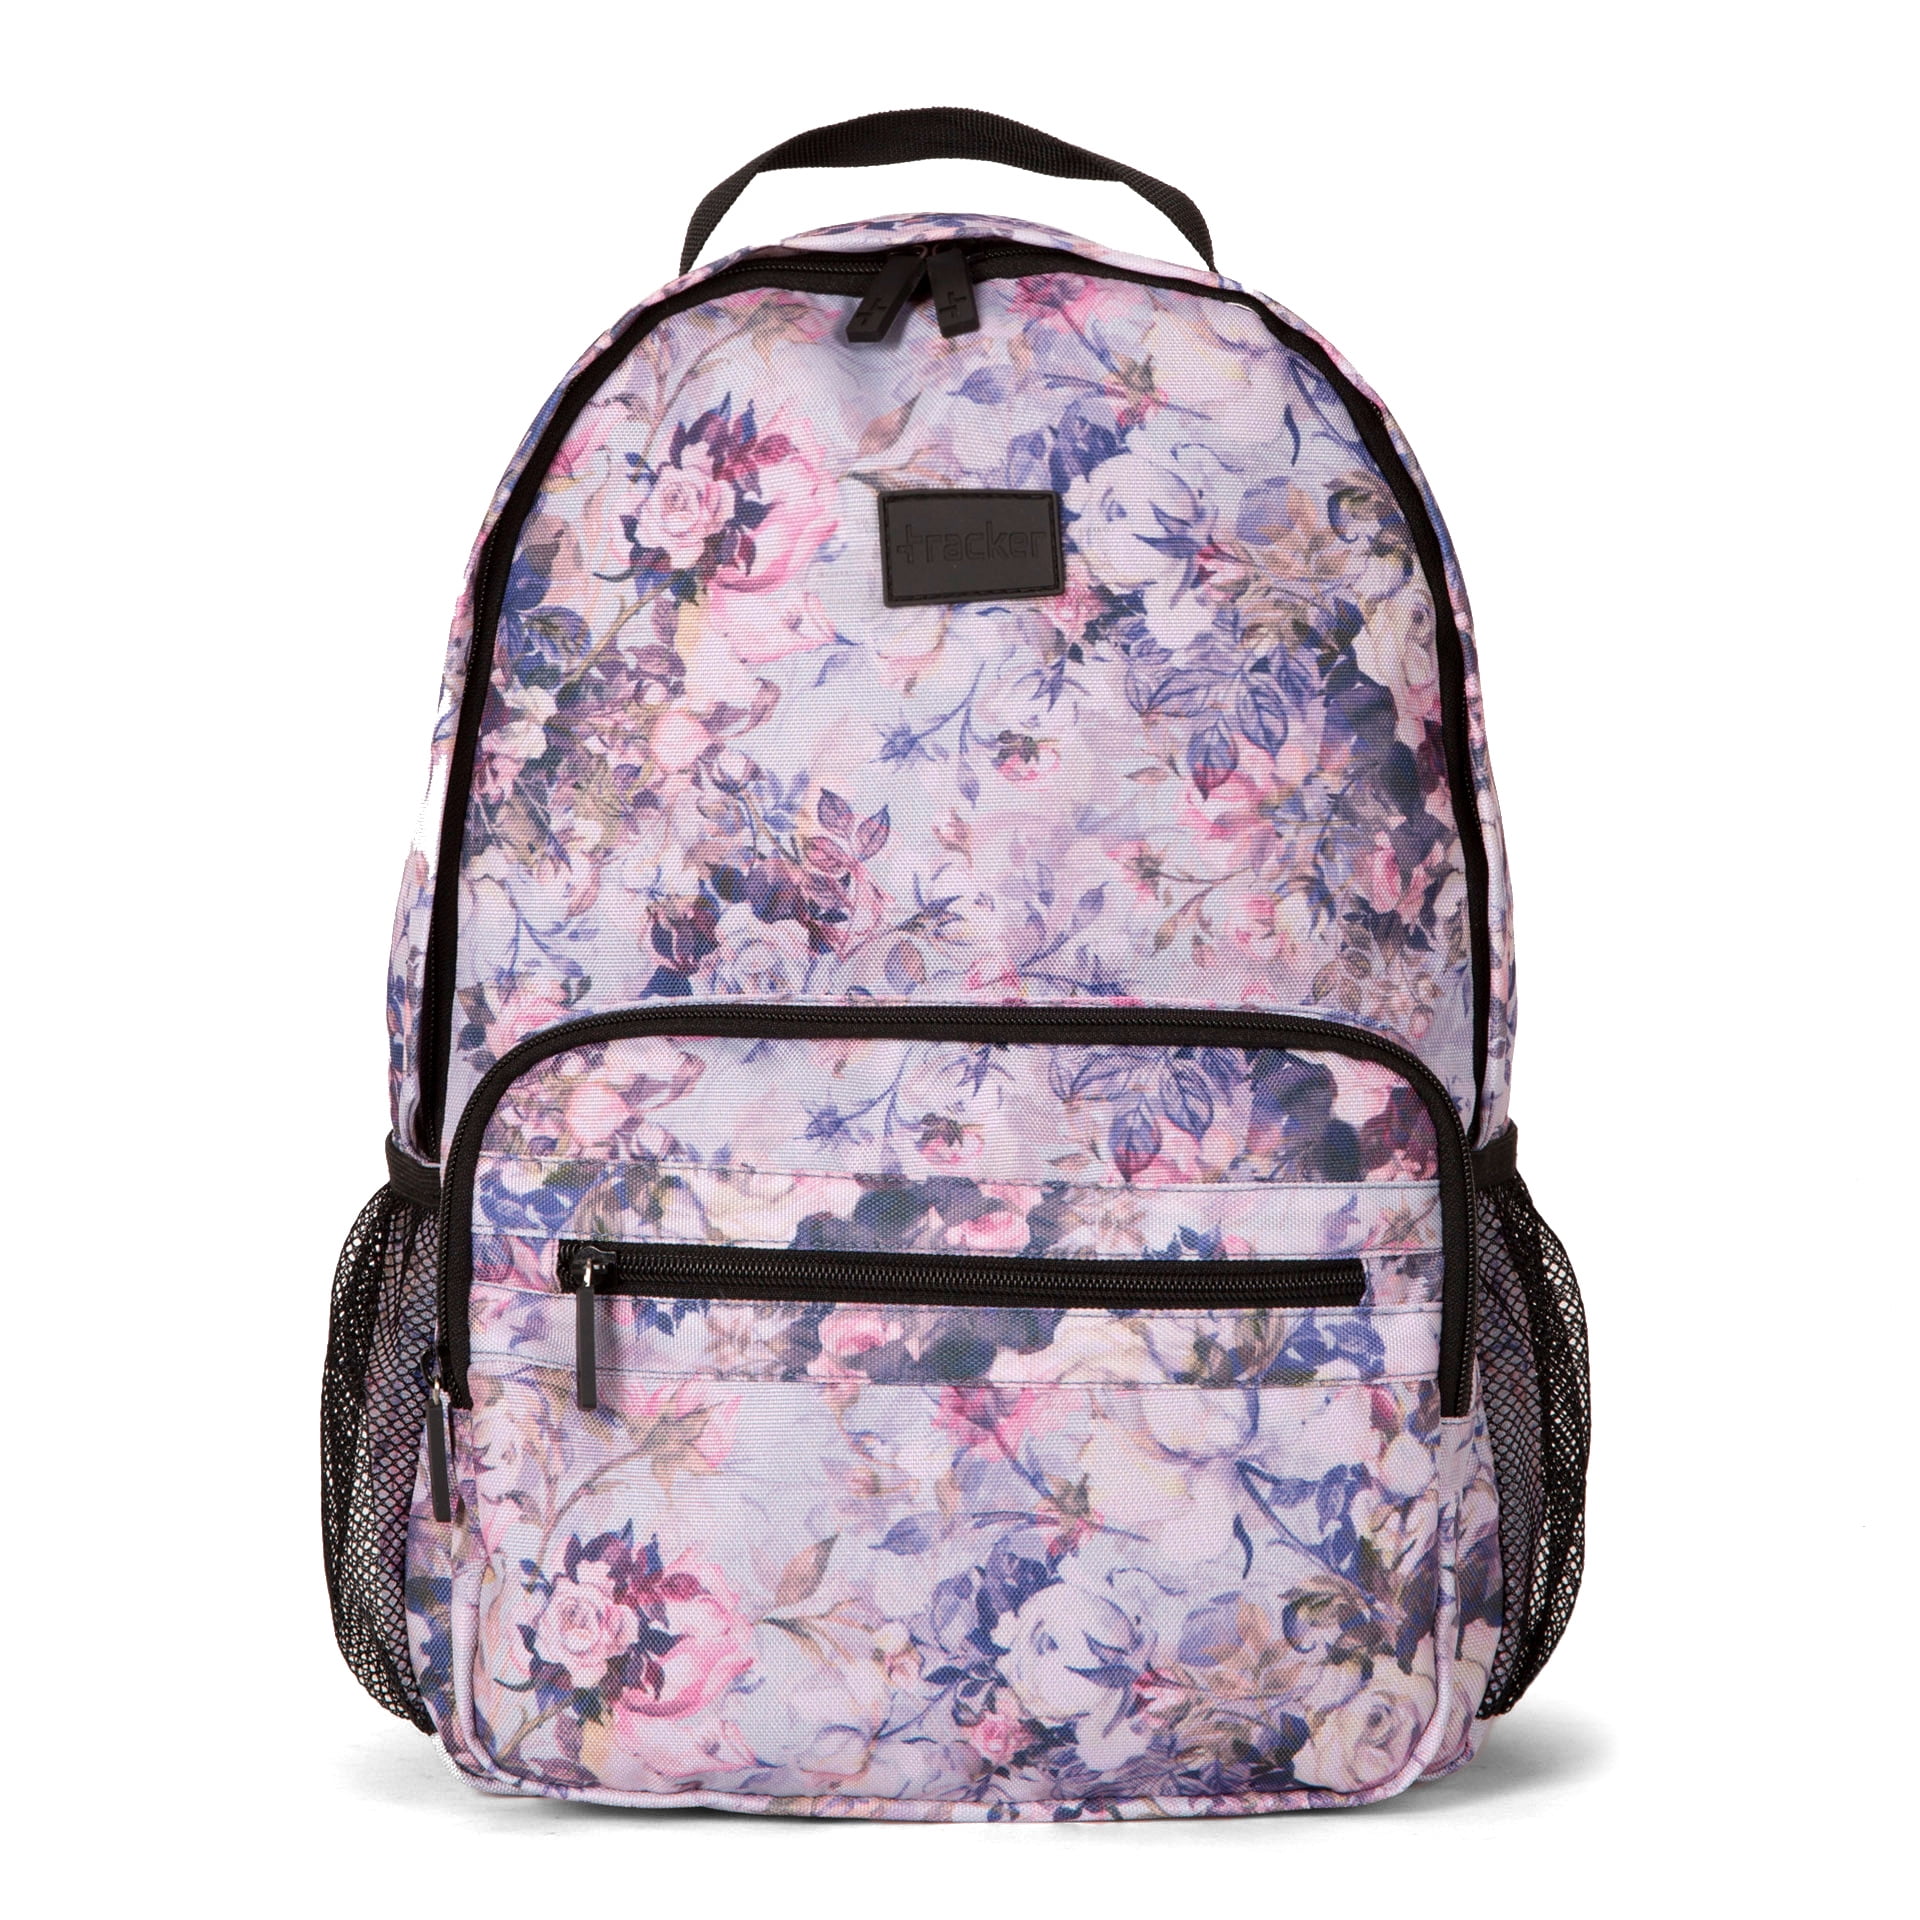 Tracker Delicate Floral Backpack | Walmart Canada